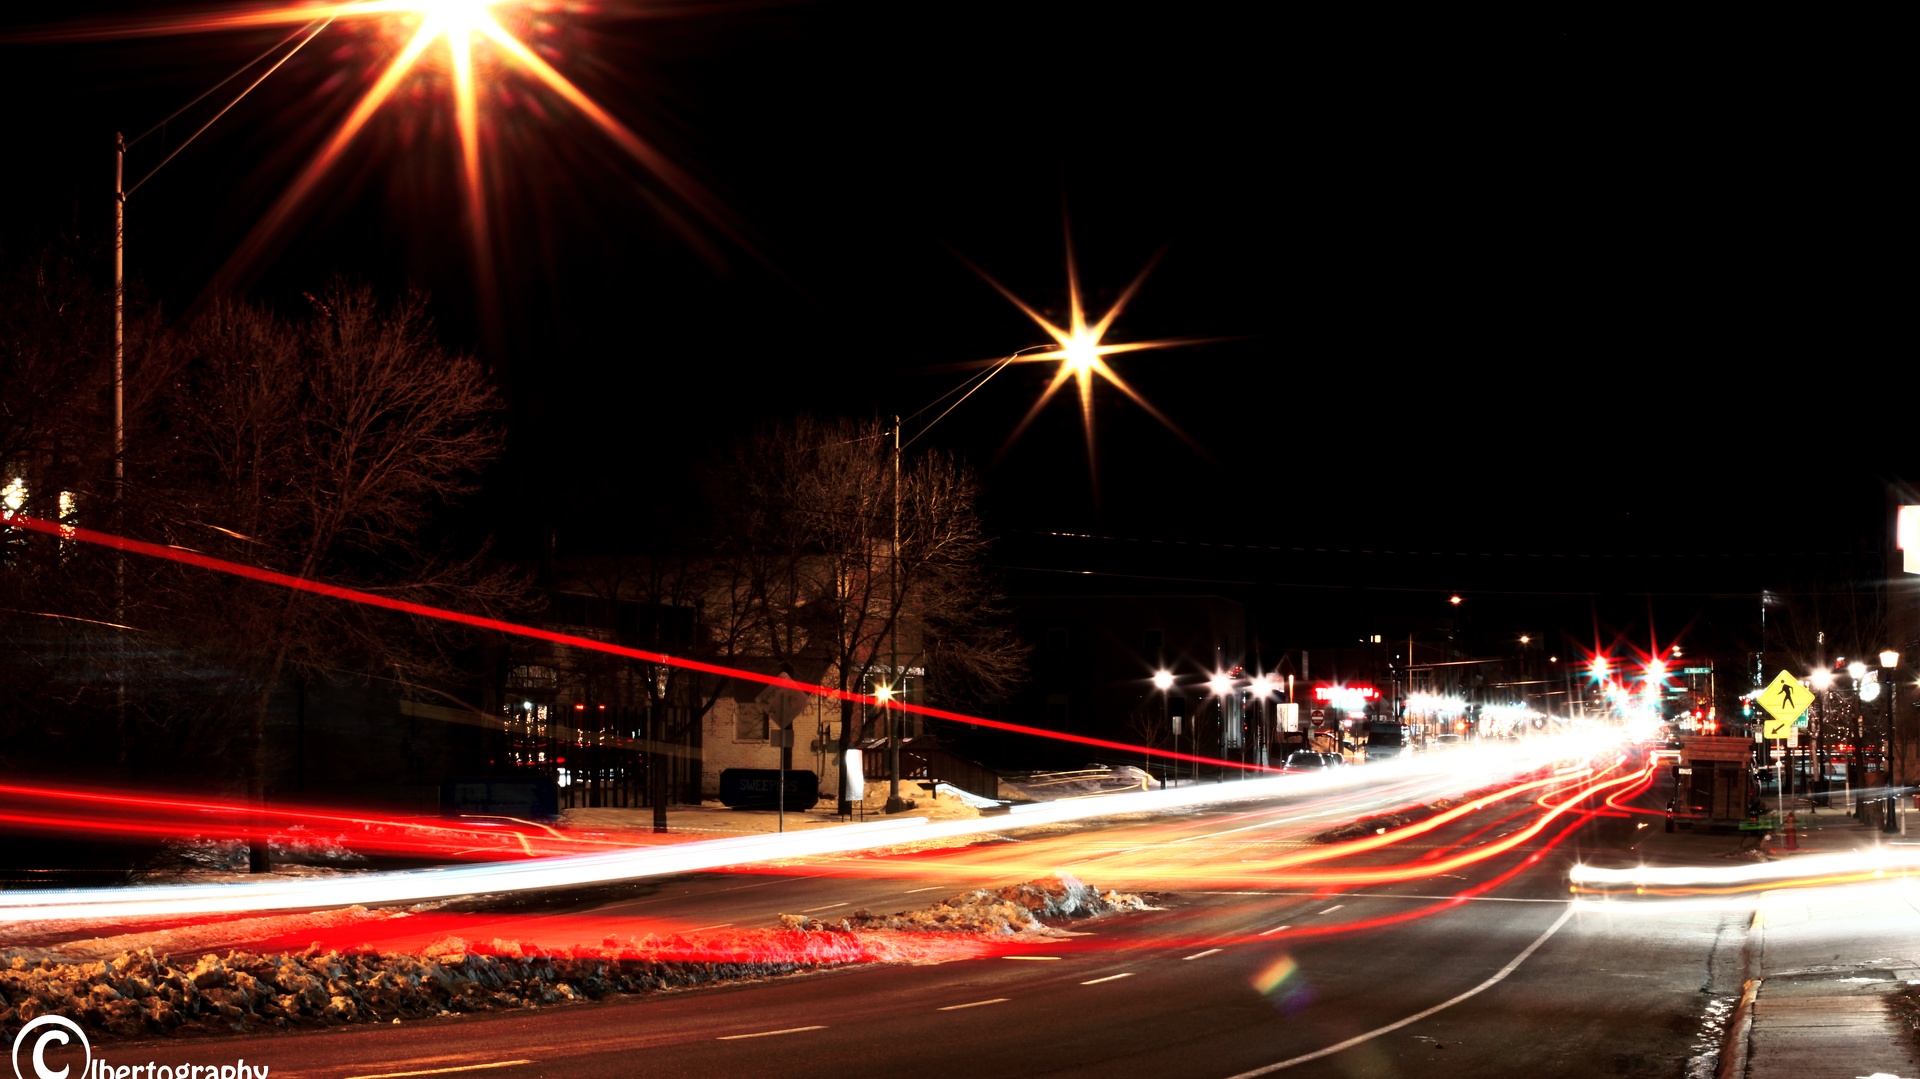 main street at night 02 28 11 by dugwin-d3angub